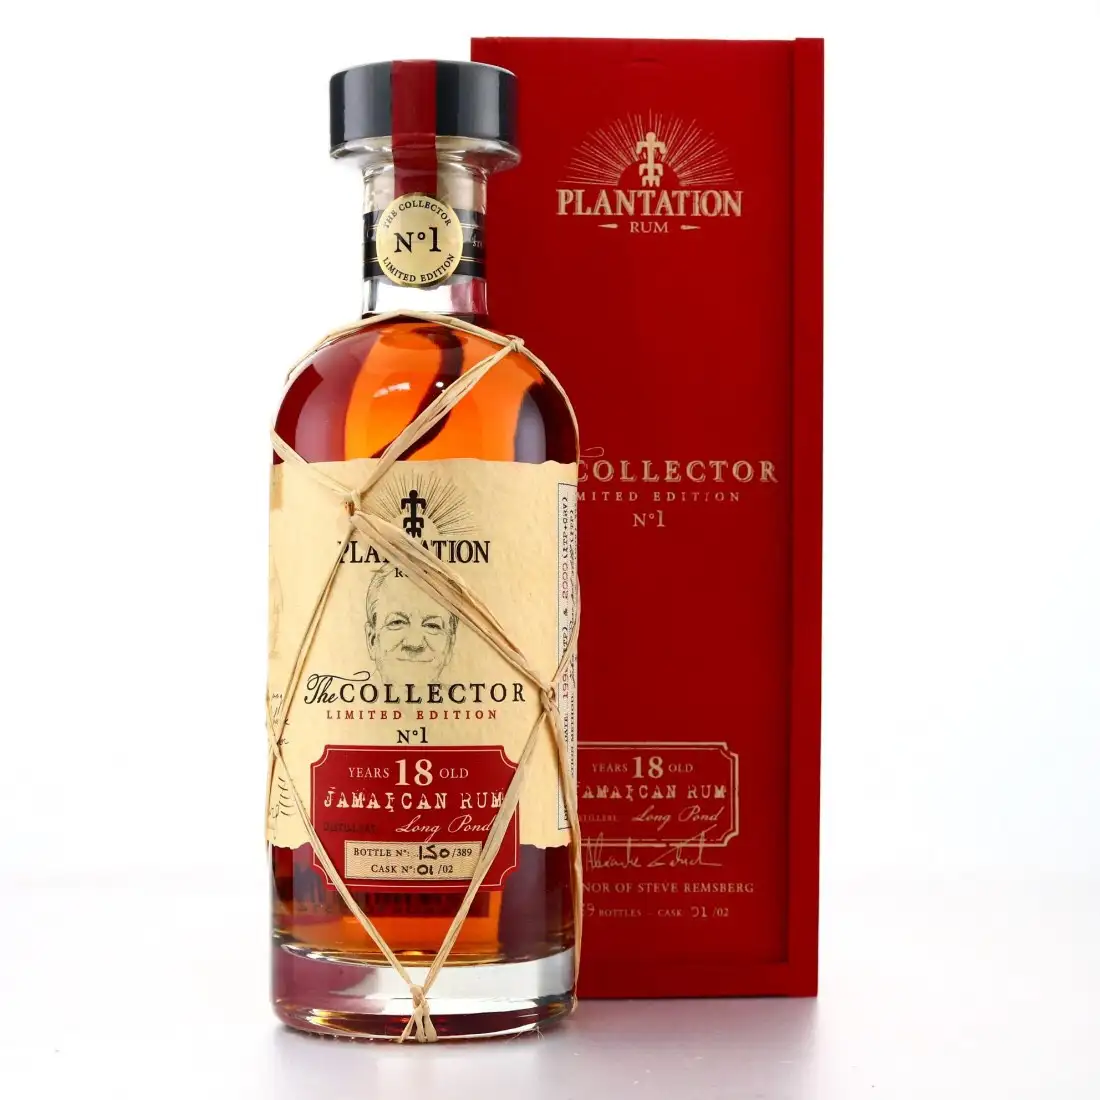 Image of the front of the bottle of the rum Plantation The Collector No. 1